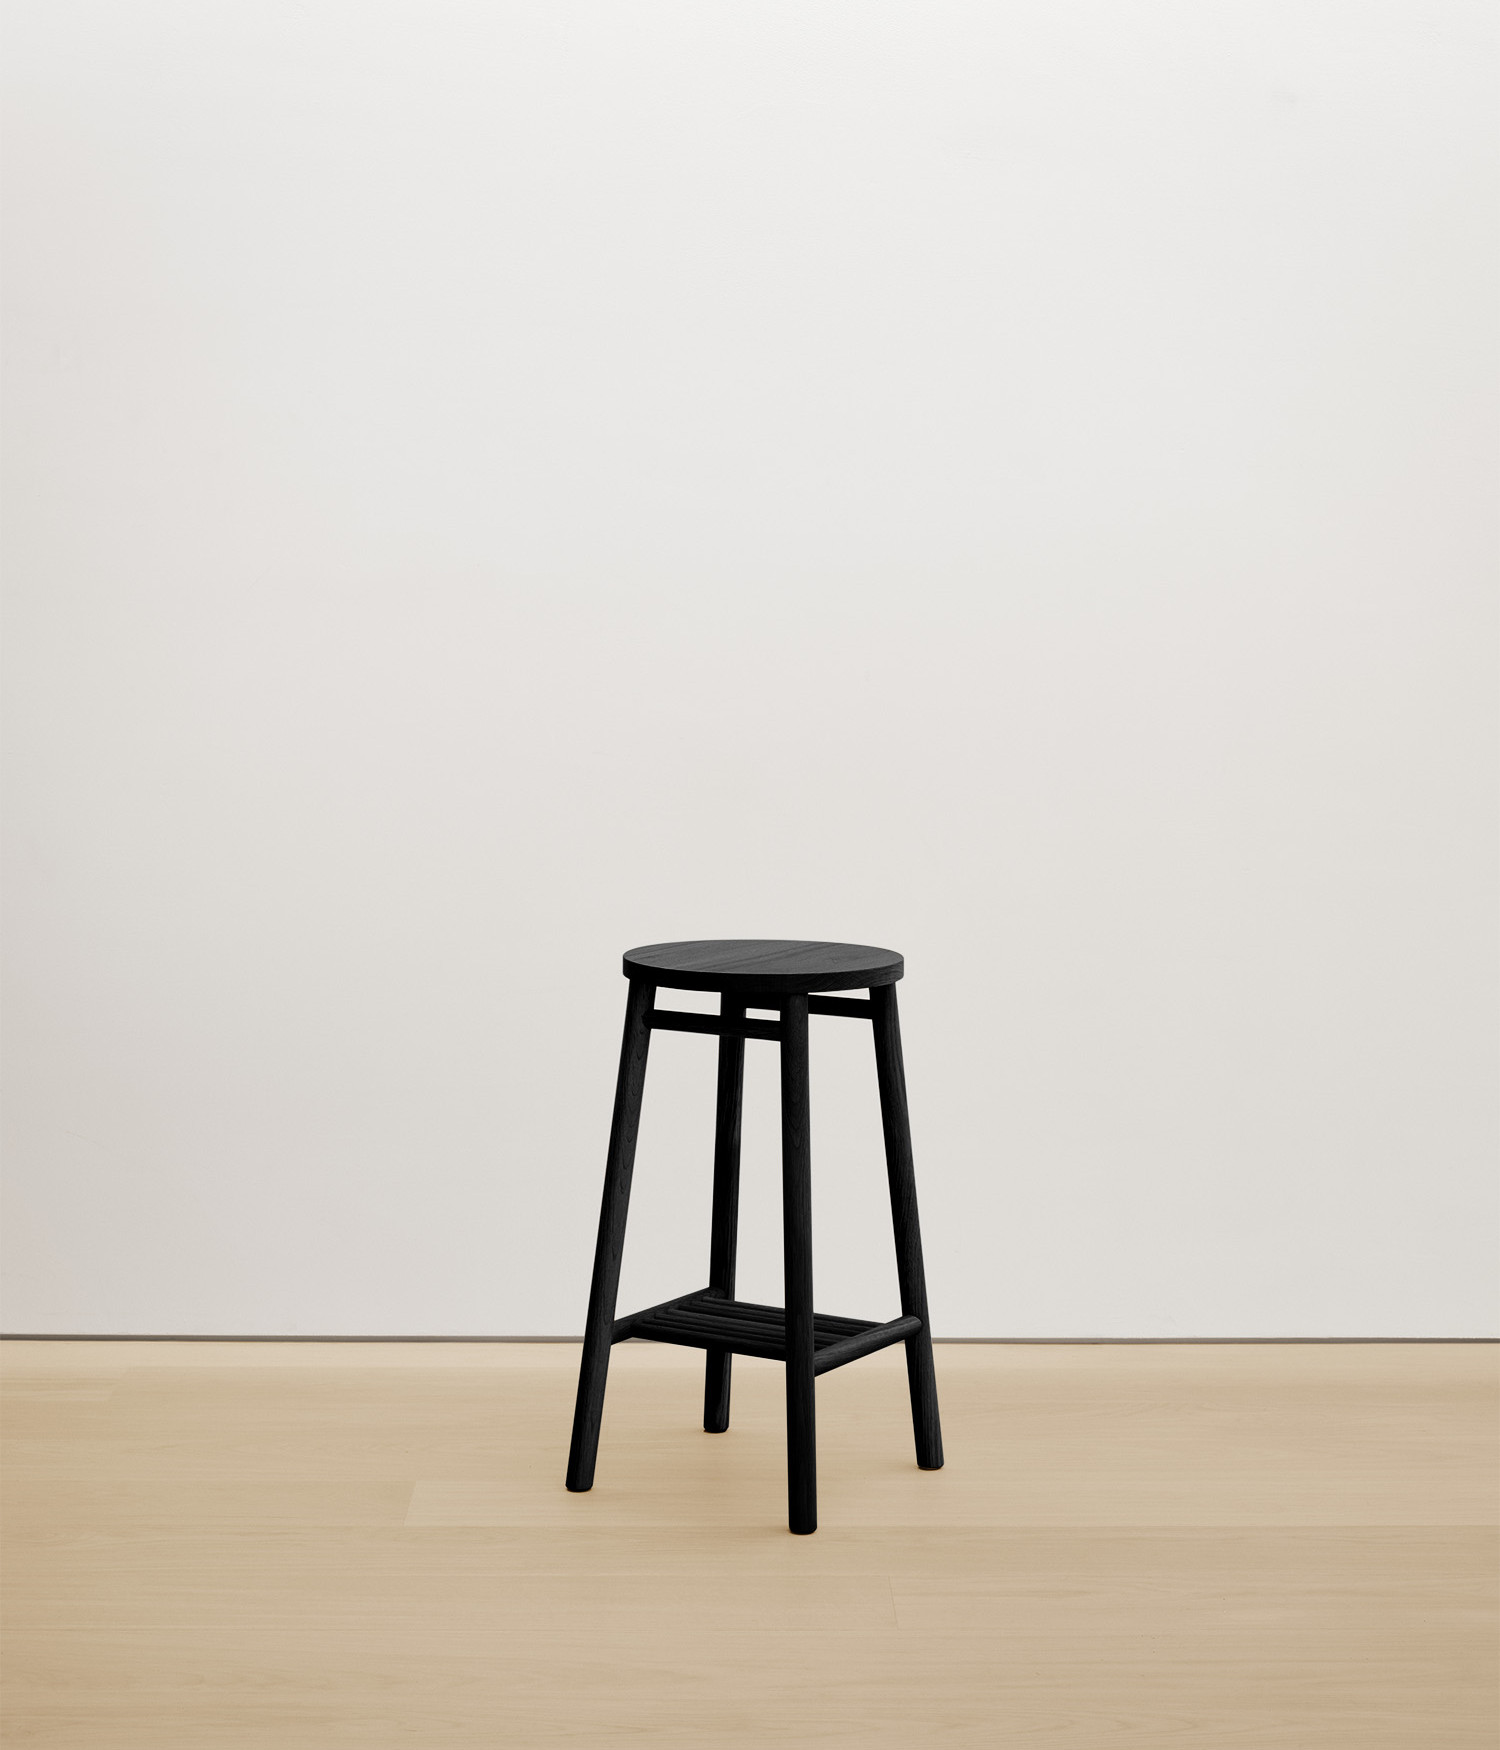  black-stained-oak stool with solid wood seat